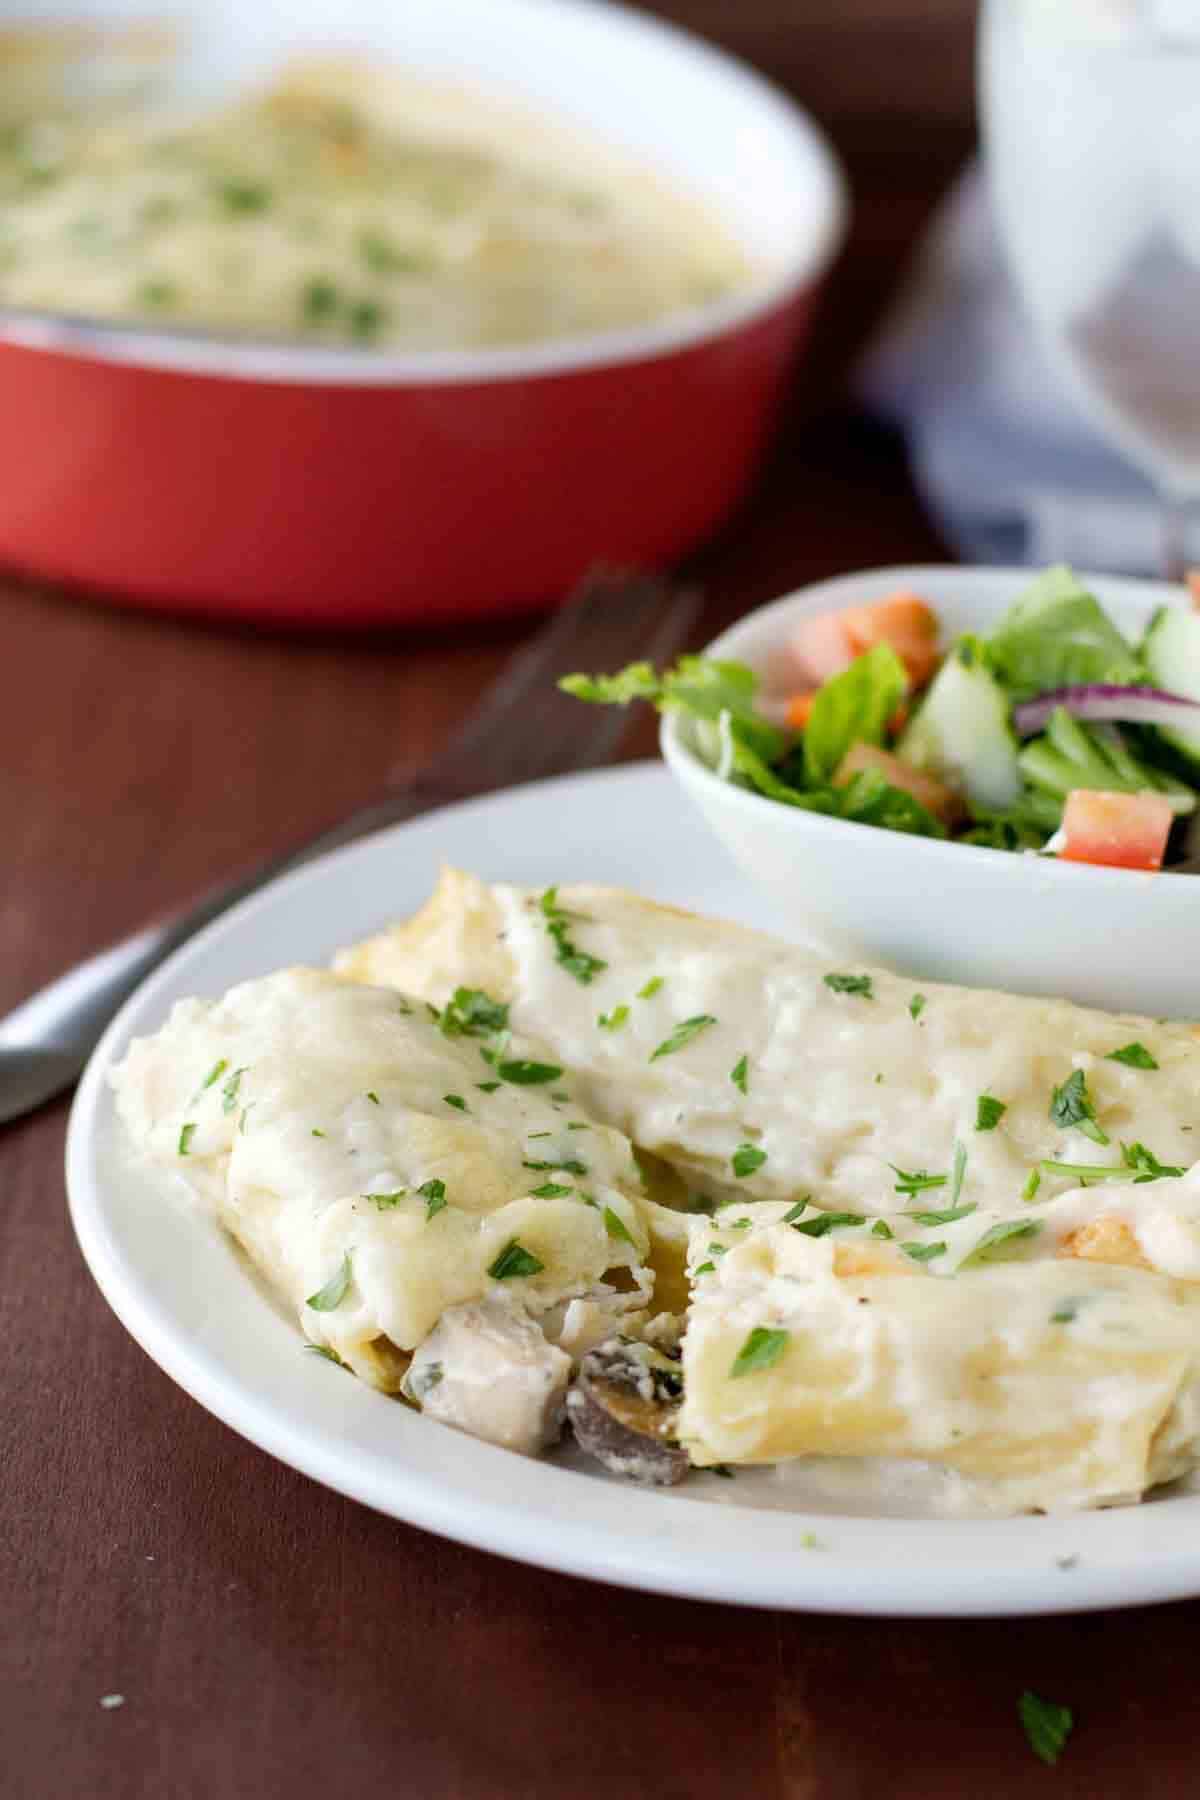 Chicken Manicotti with mushrooms cut in half to show the filling.